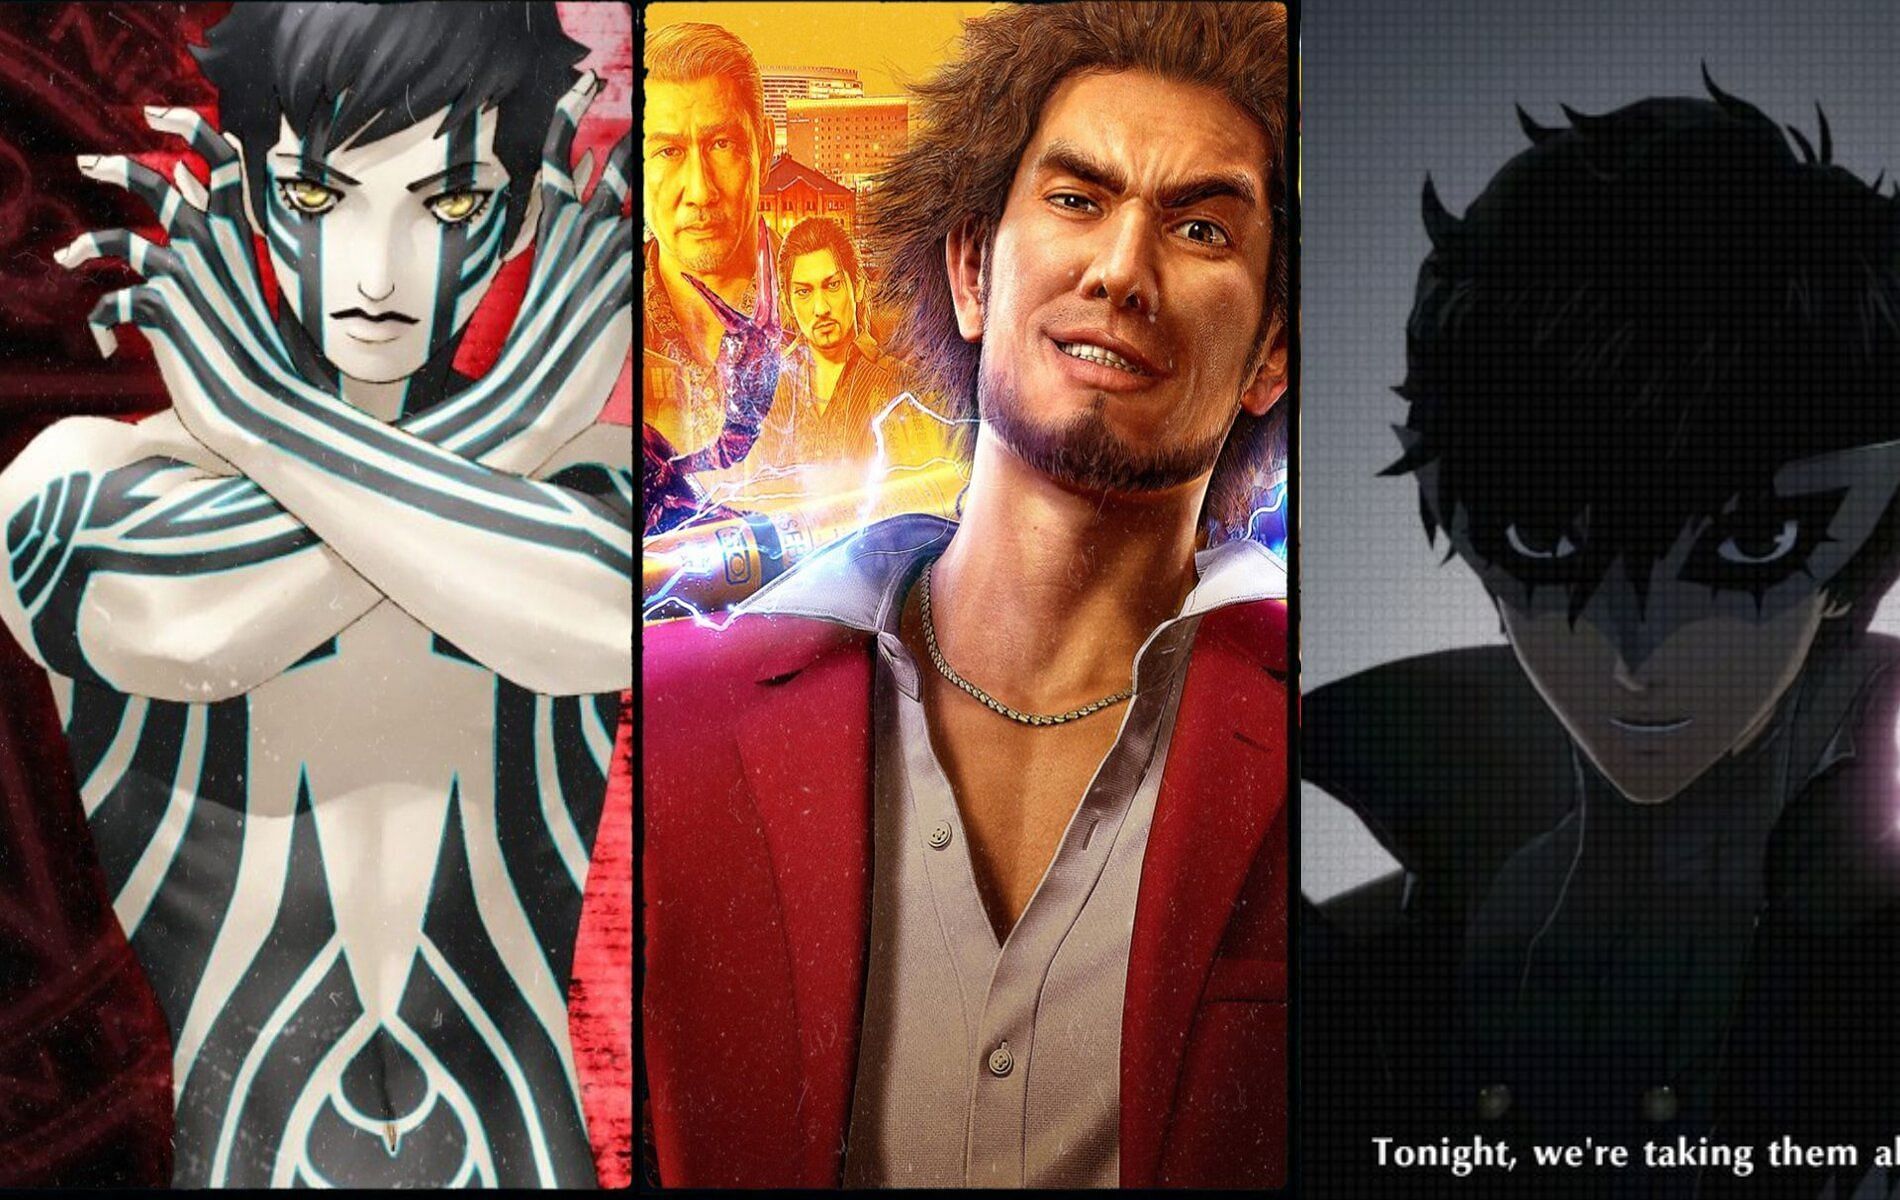 Images from SMT3, Yakuza 7 and Persona 5